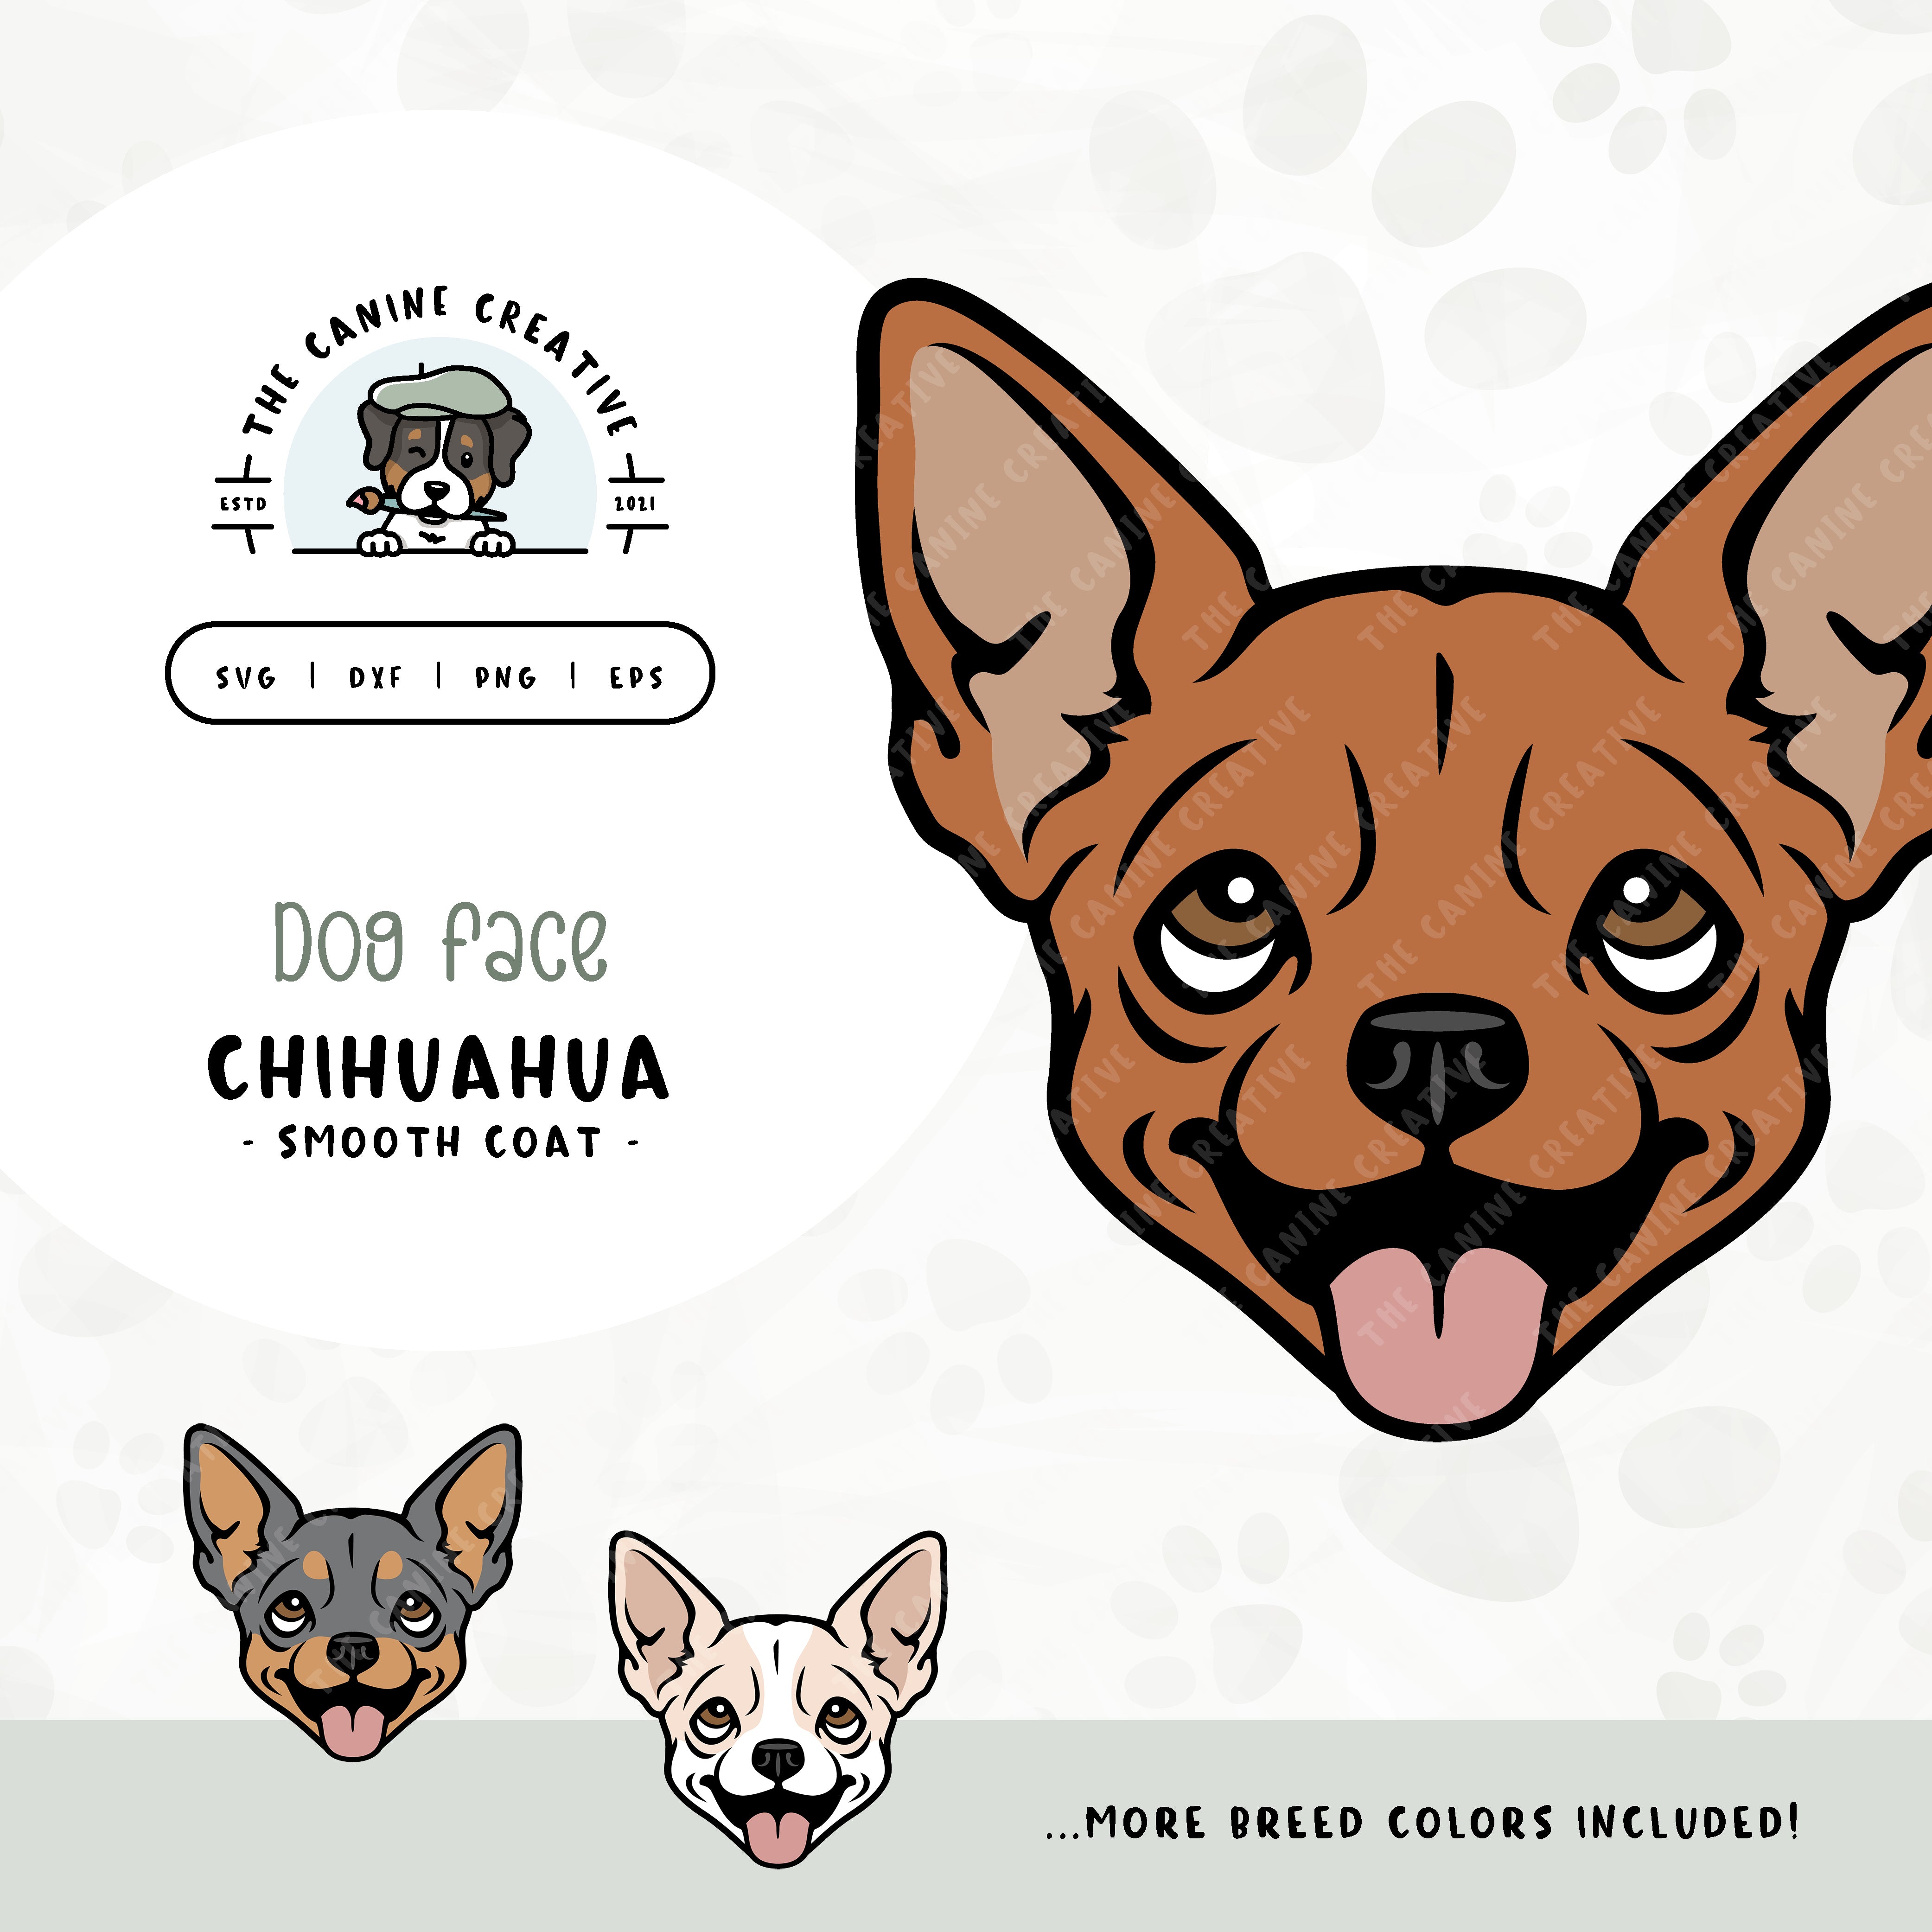 This illustrated design features a Smooth Coat Chihuahua face. File formats include: SVG, DXF, PNG, and EPS.